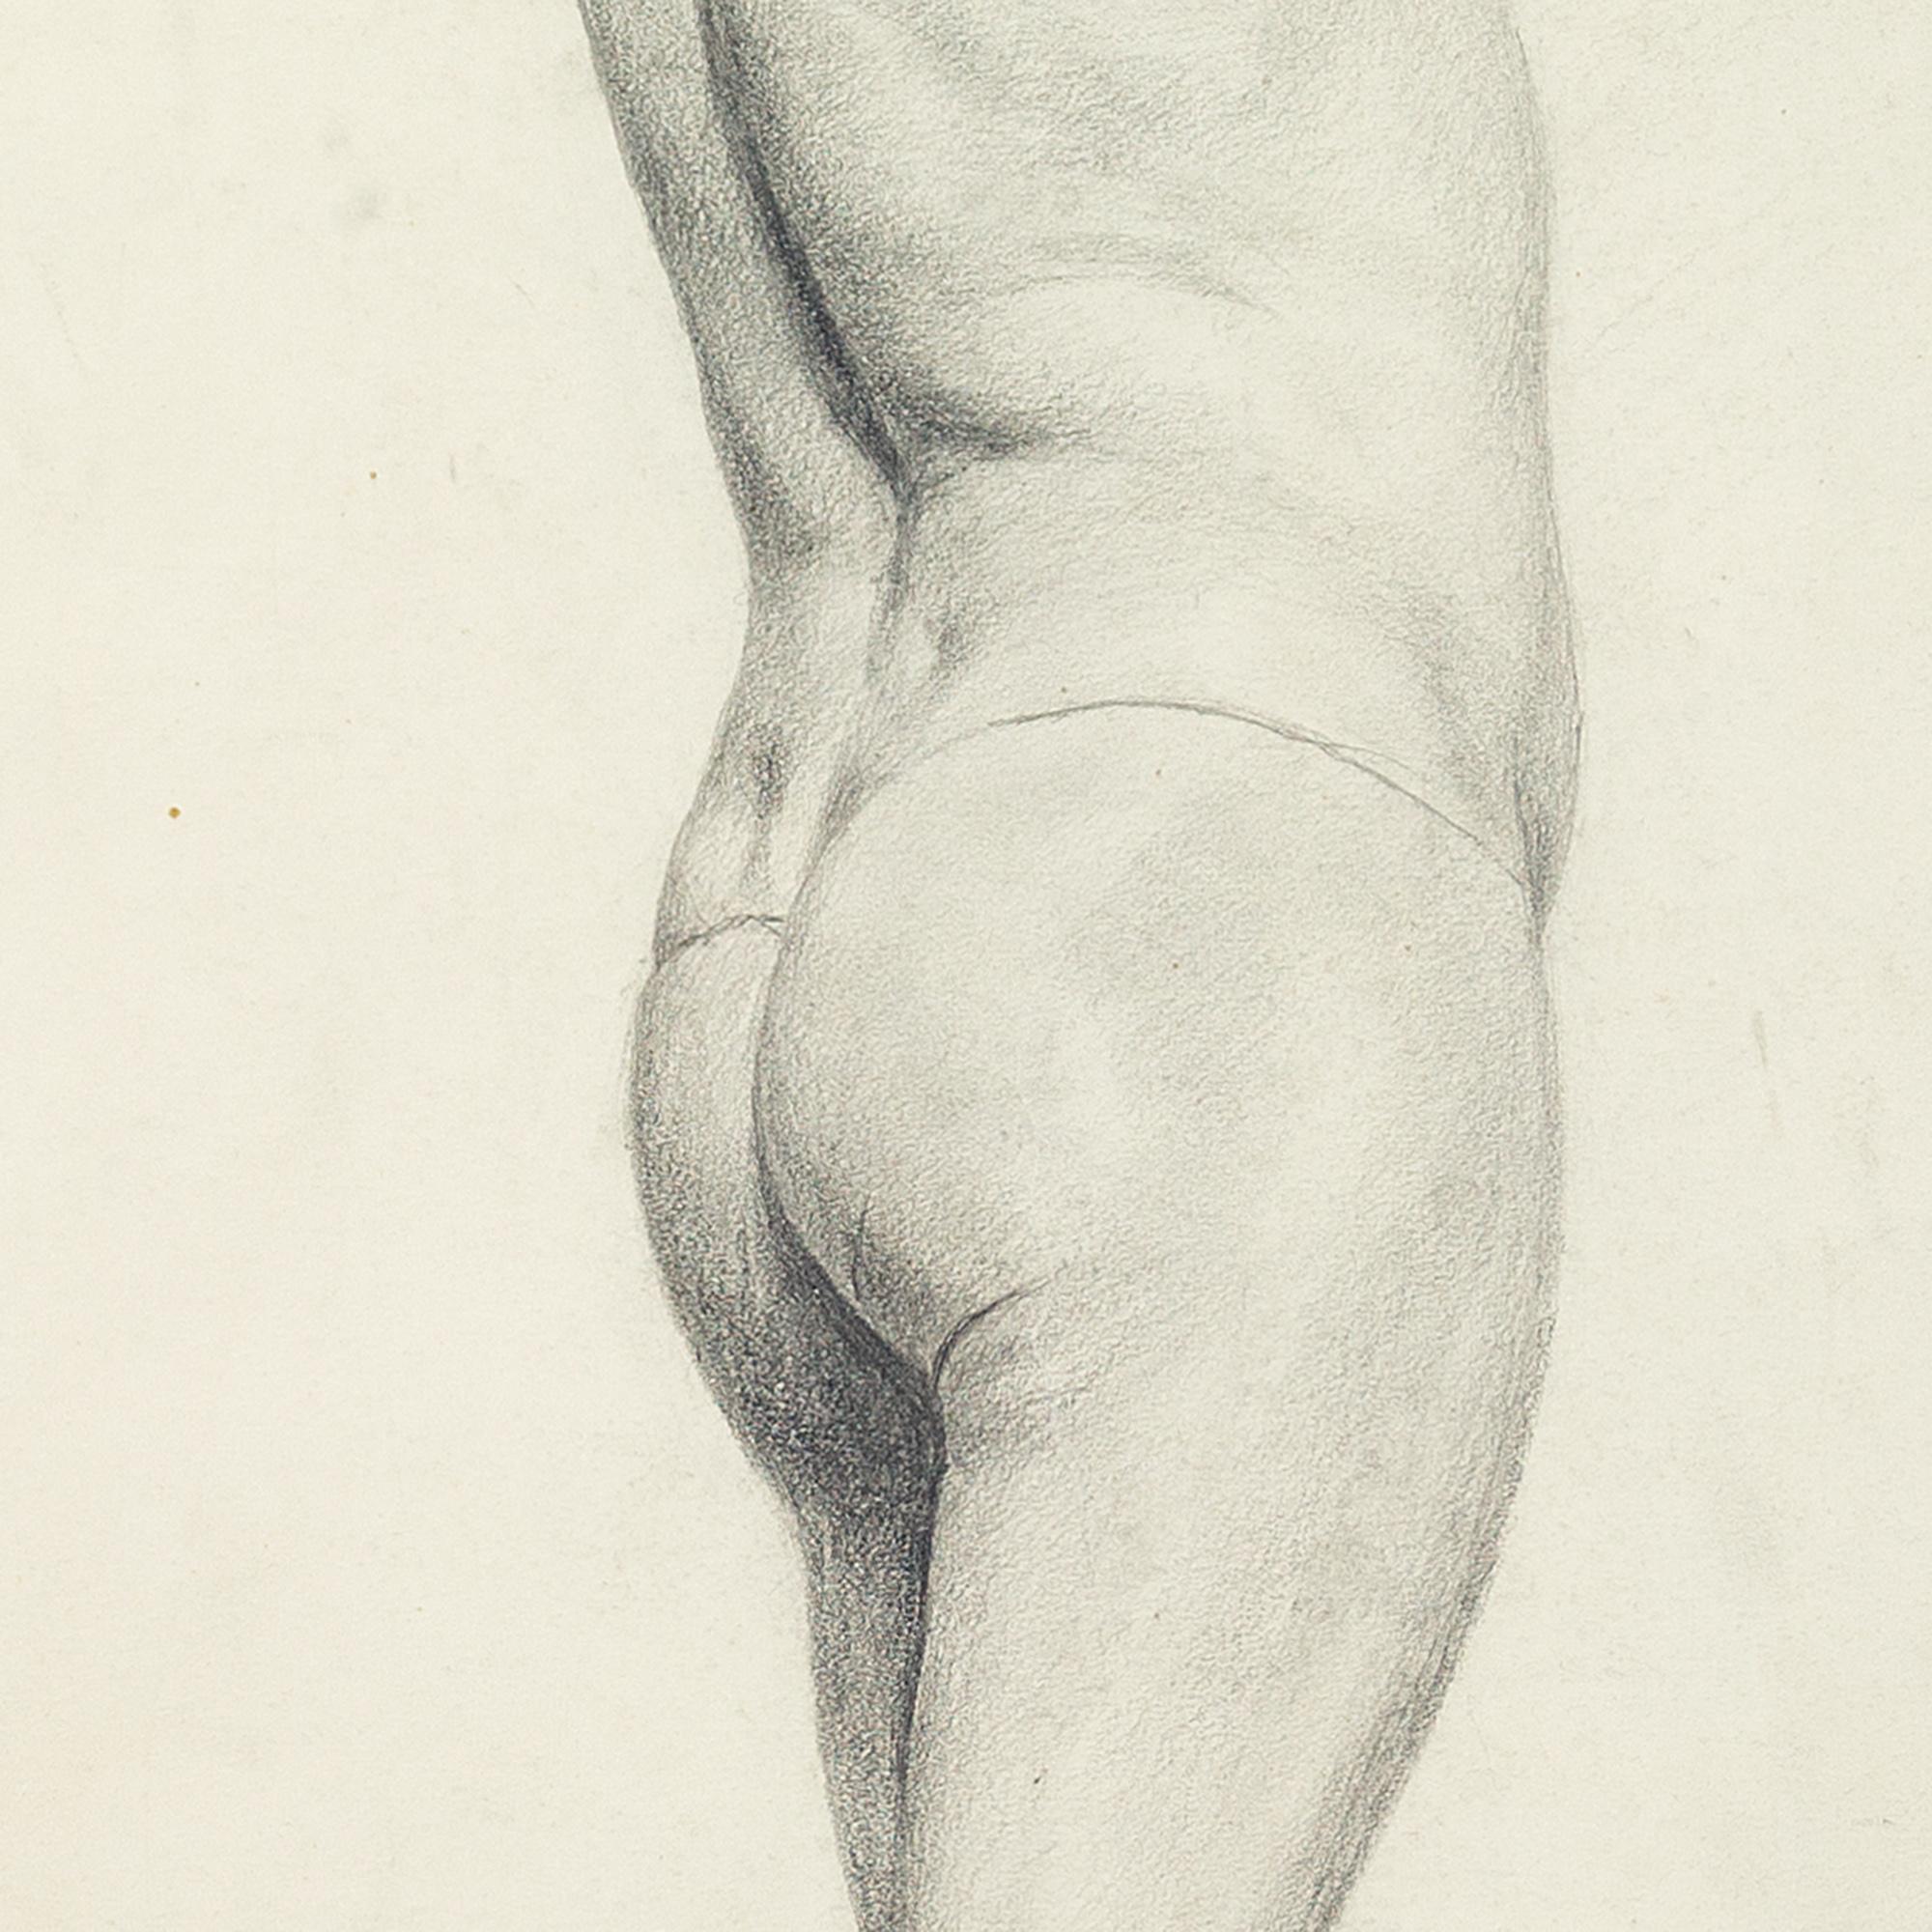 This nude study of a man by German artist, Christian Landenburger (1862-1927) is skilfully observed and rendered with a masterful touch. In 1920, when this was produced, Landenburger was employed as a professor at the Academy of Fine Arts, Stuttgart